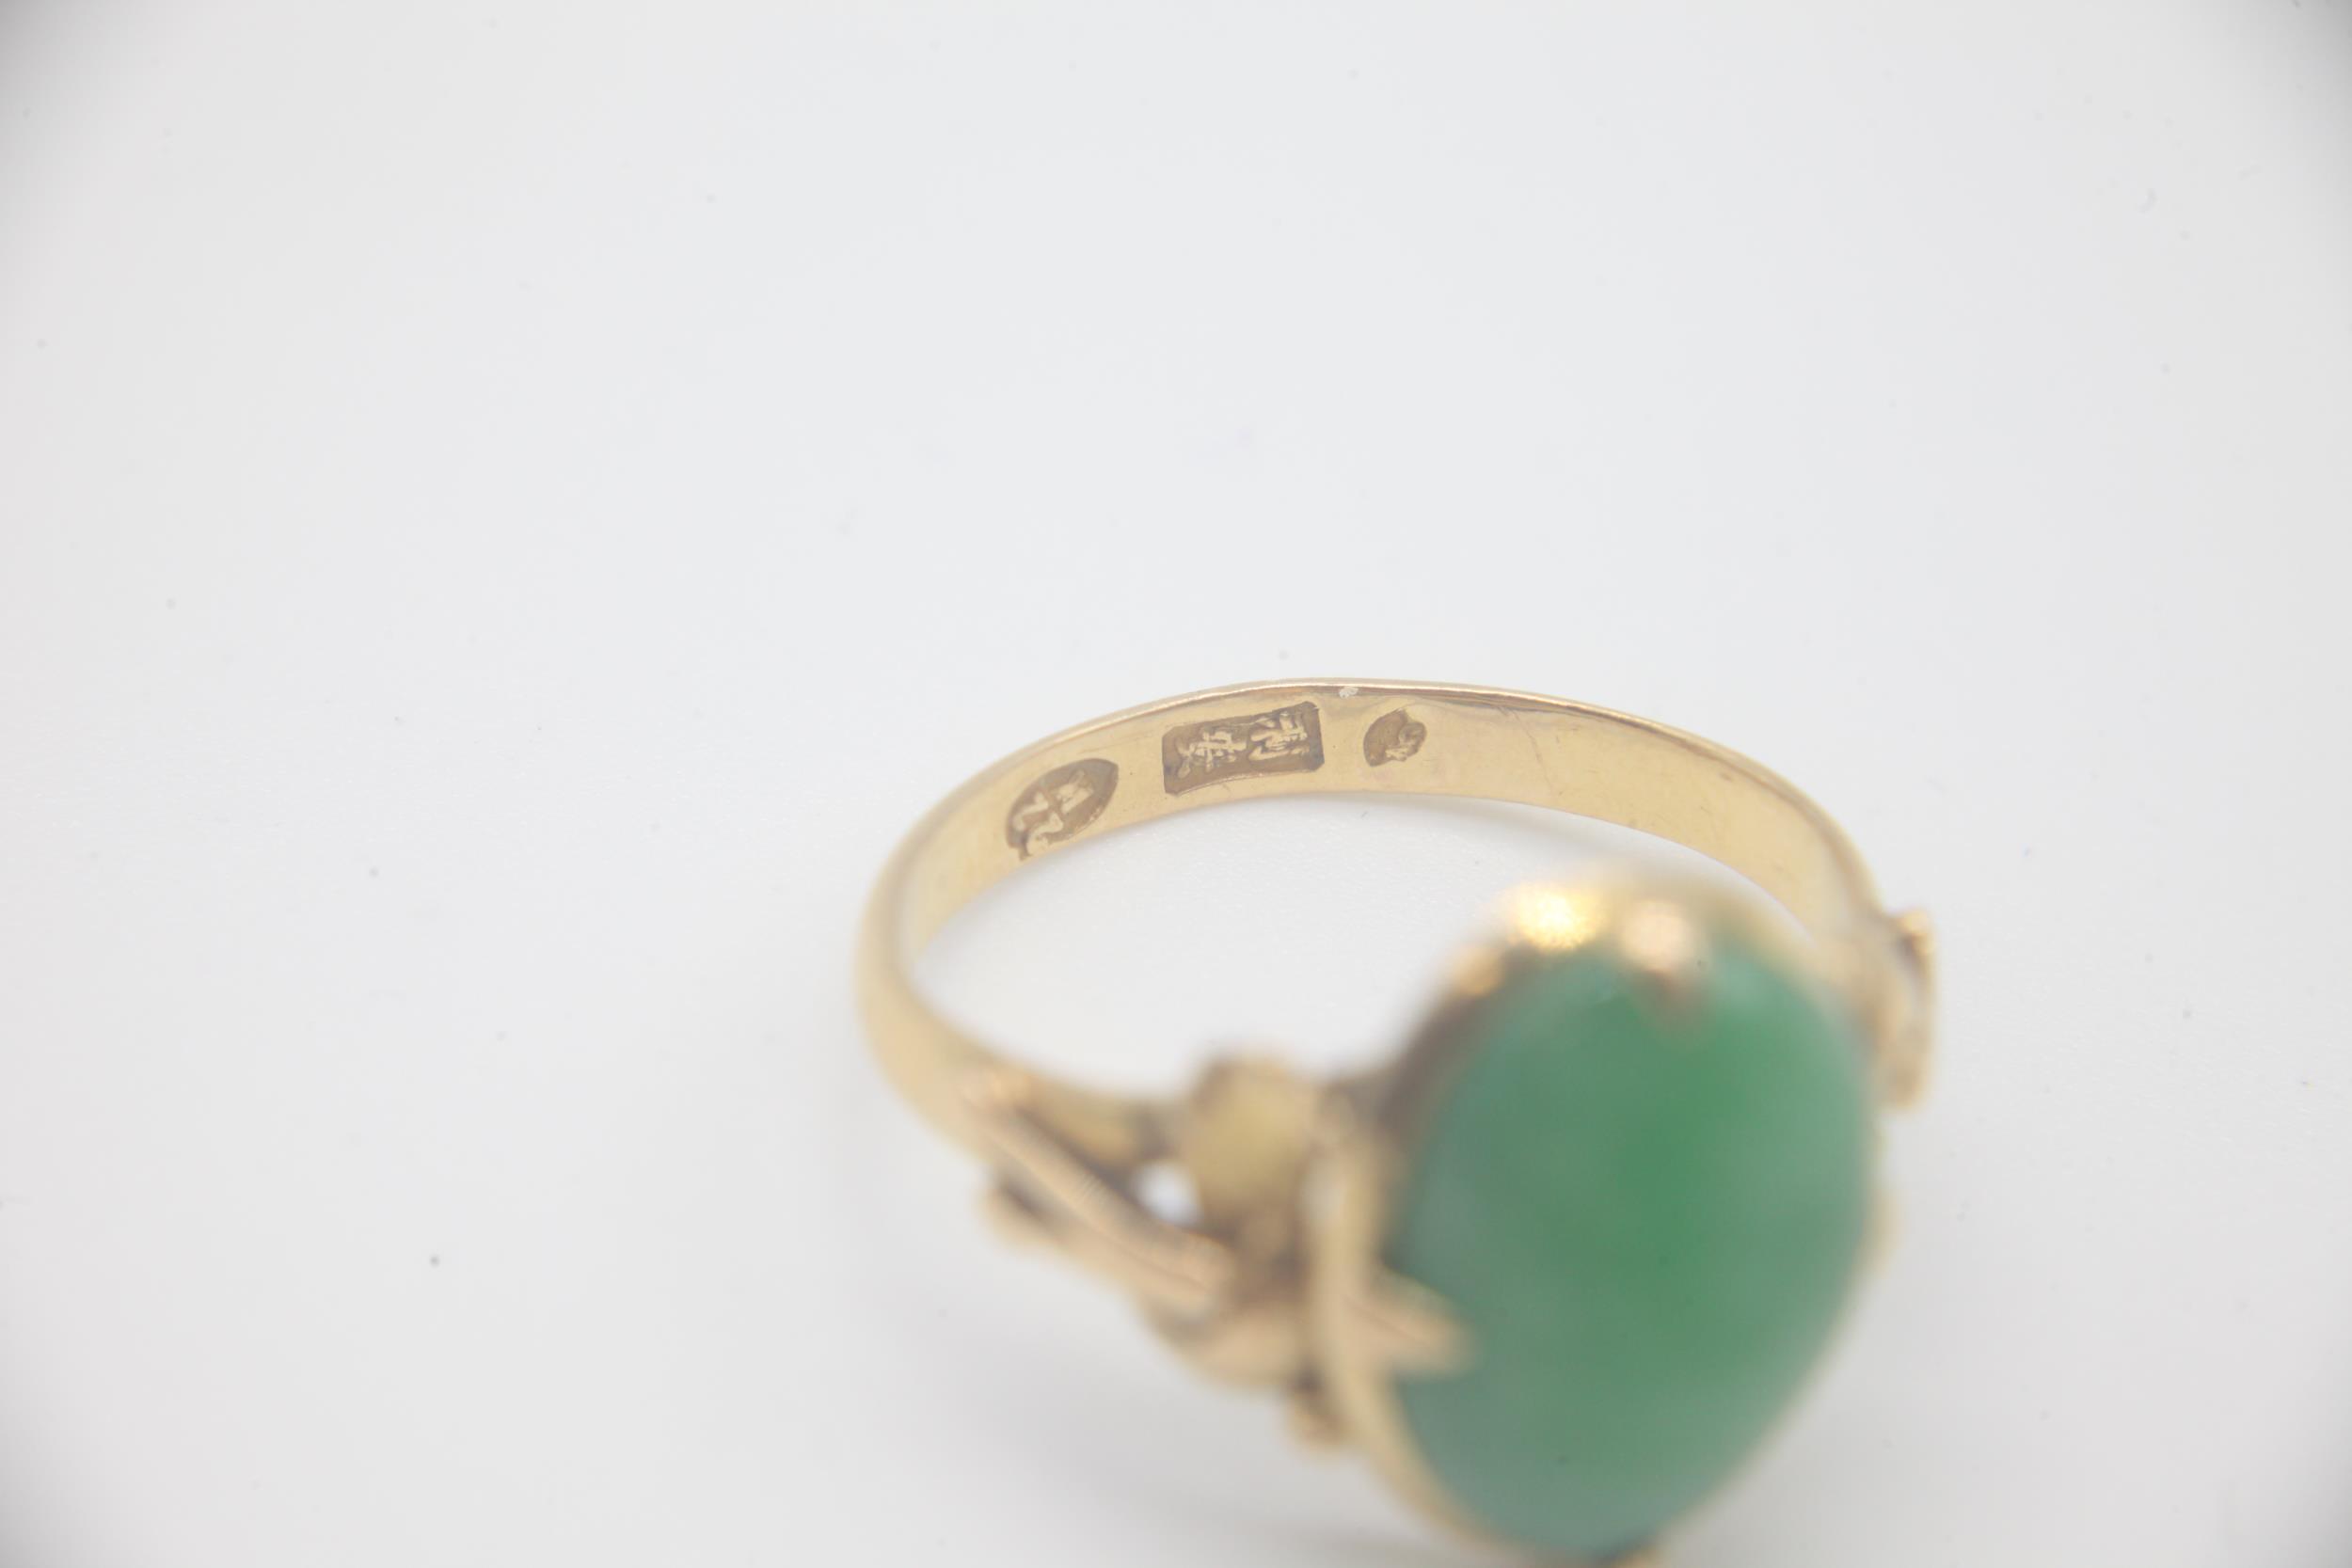 Antique Chinese 22ct Gold and Jade RingMarked 22K as well as Chinese Characters on the inside of the - Image 3 of 7